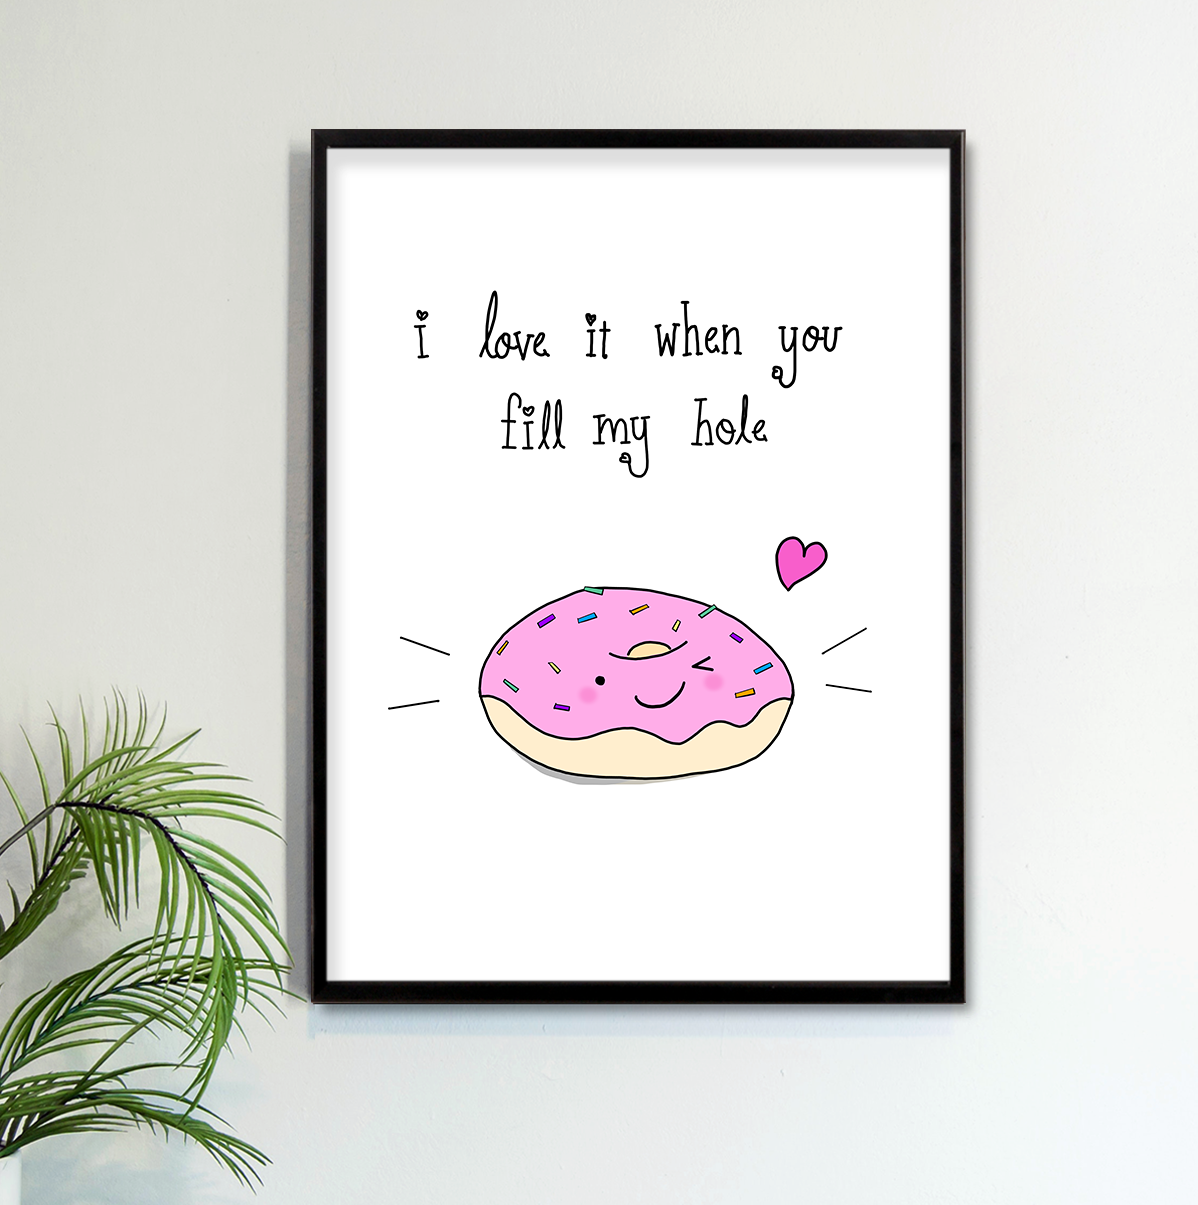 LOVE IT WHEN YOU FILL MY HOLE Art Print